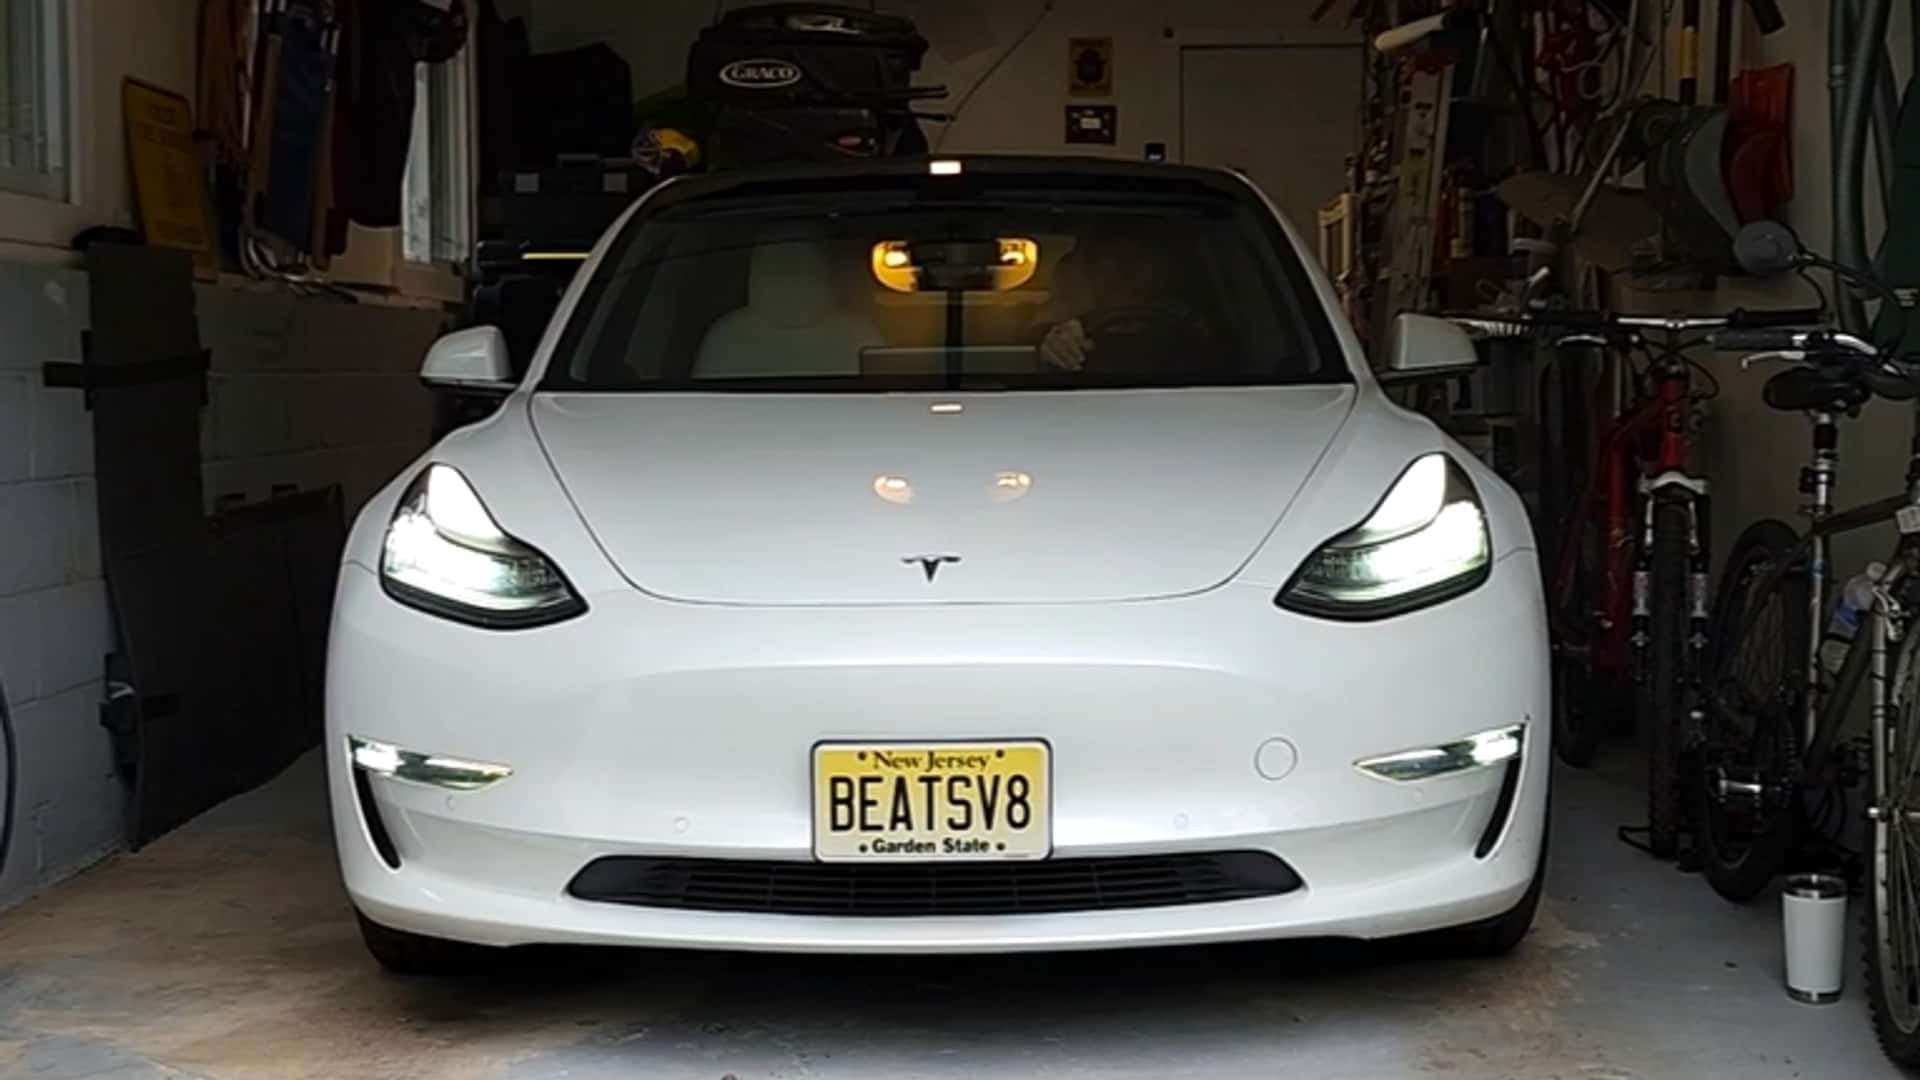 tesla model 3 owner sings its praise after four years and 100,000 miles